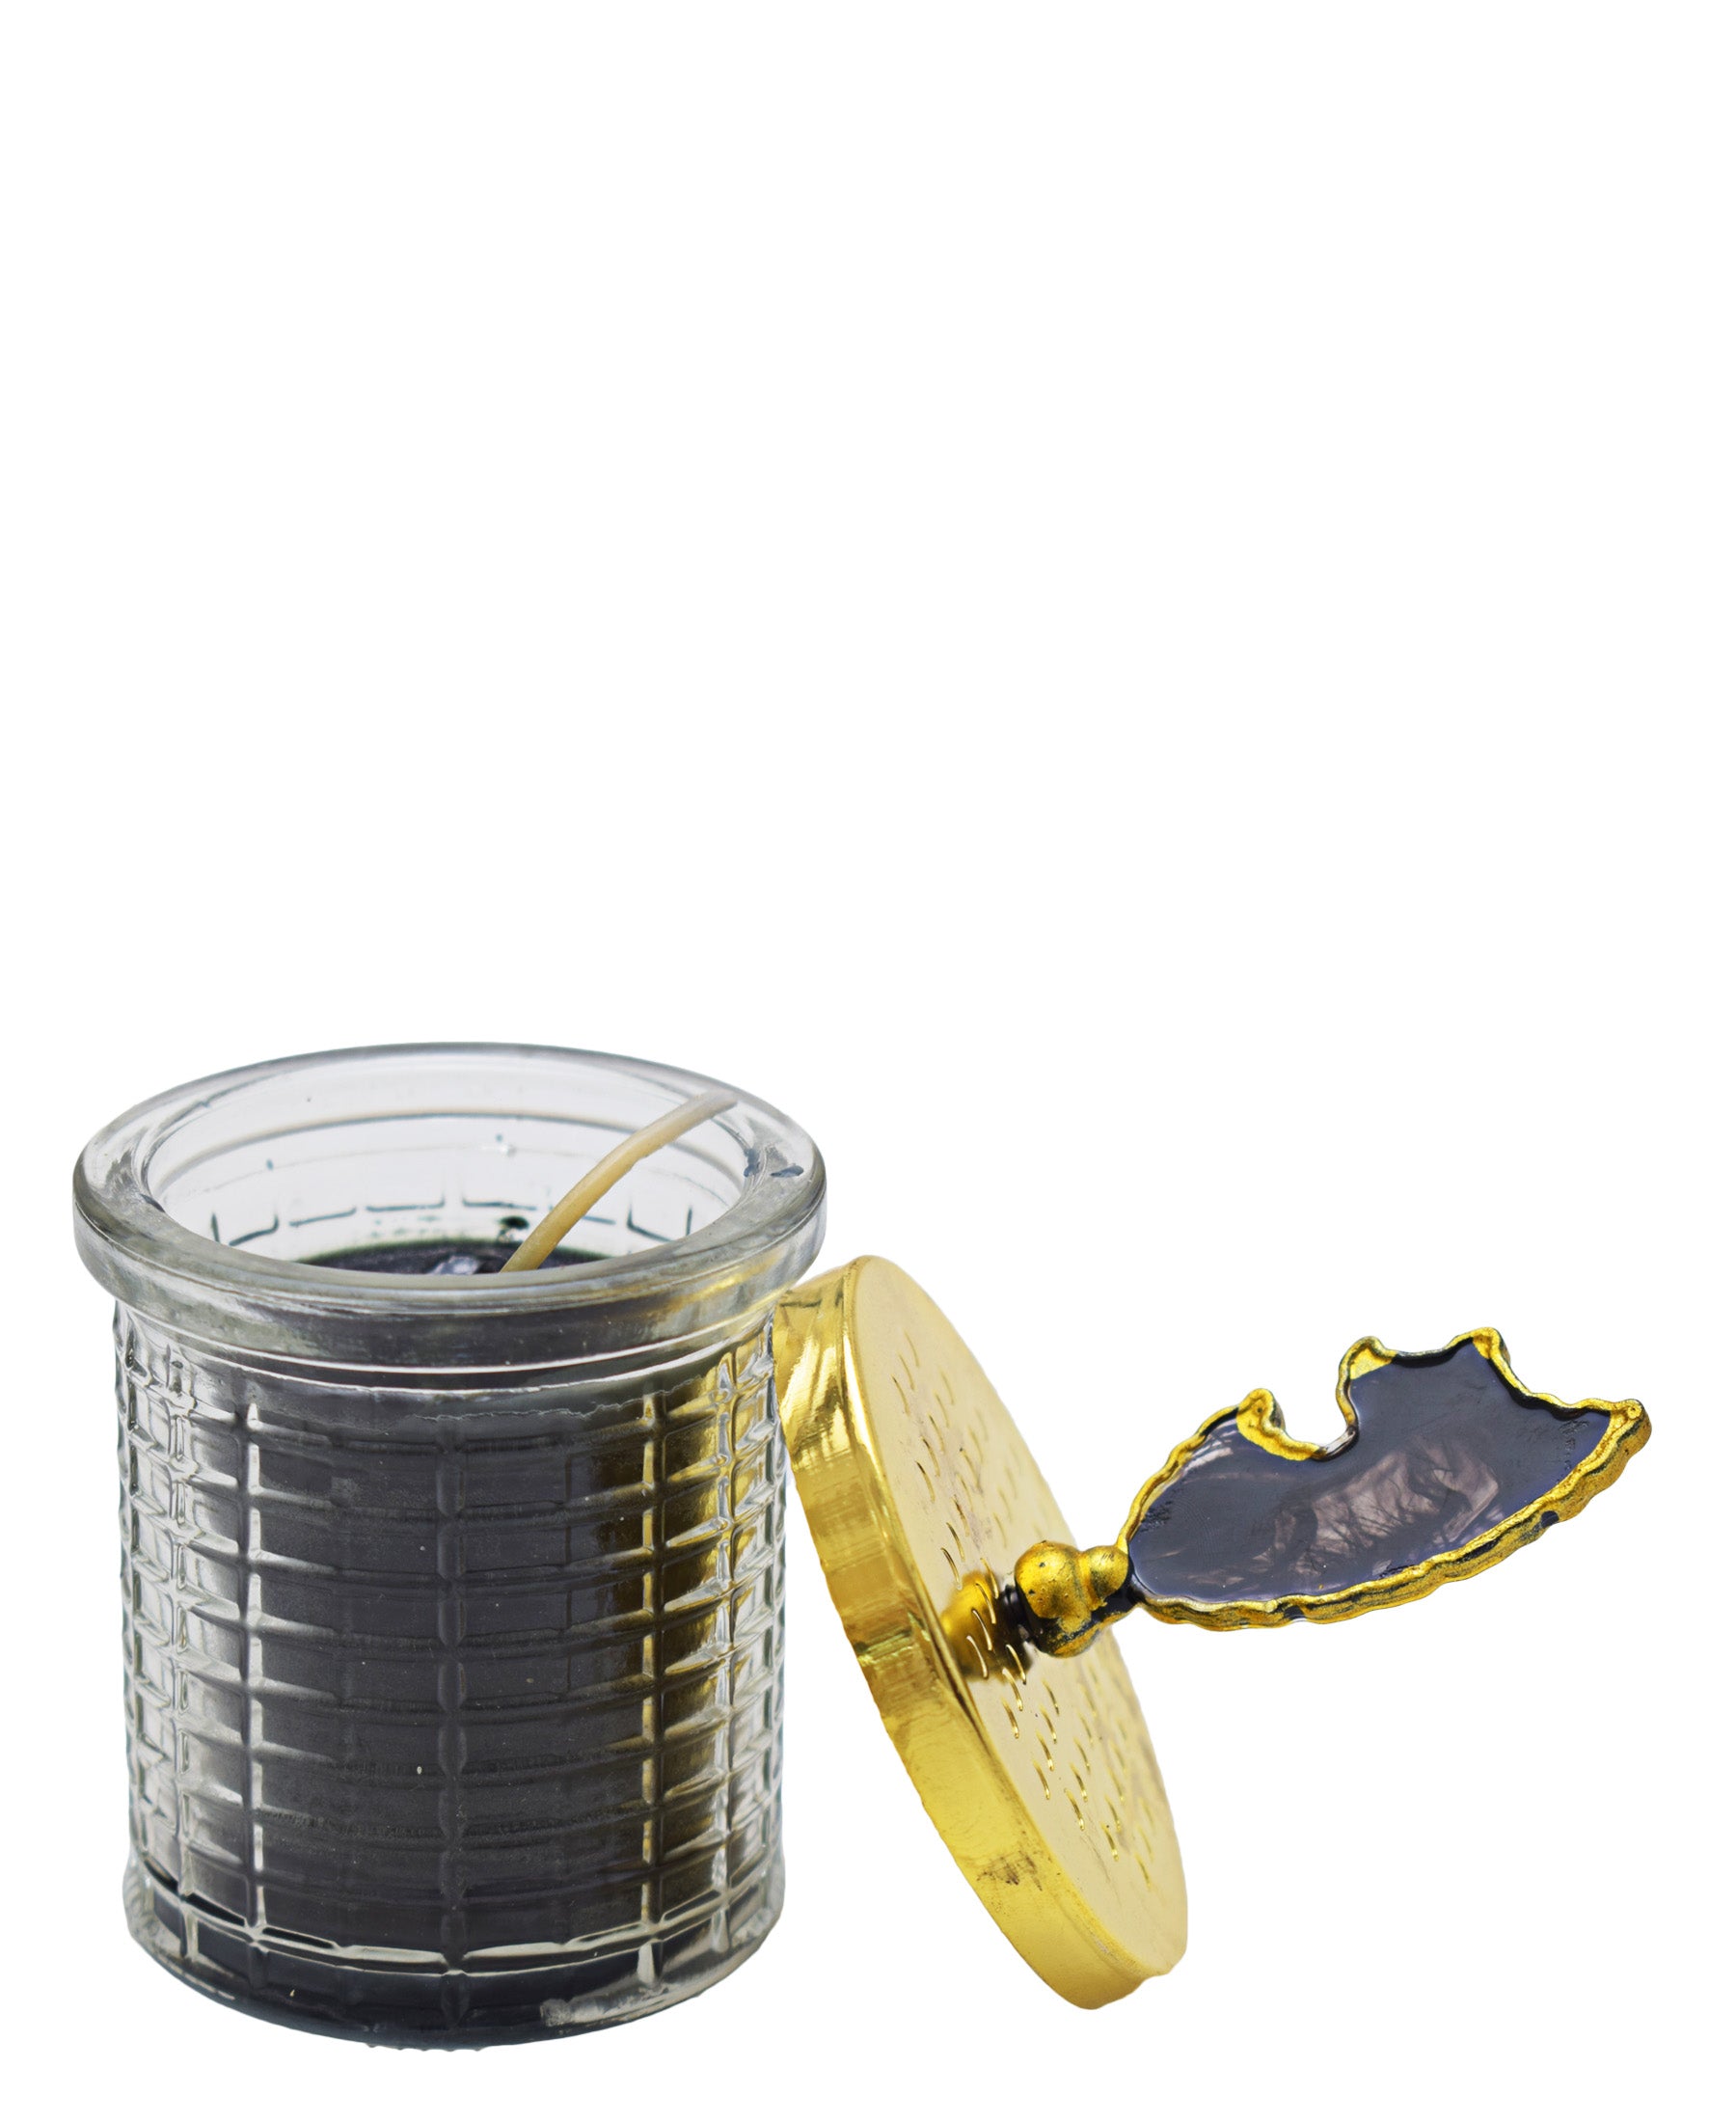 Urban Decor Scented Candle With Glass Jar 11cm - Black